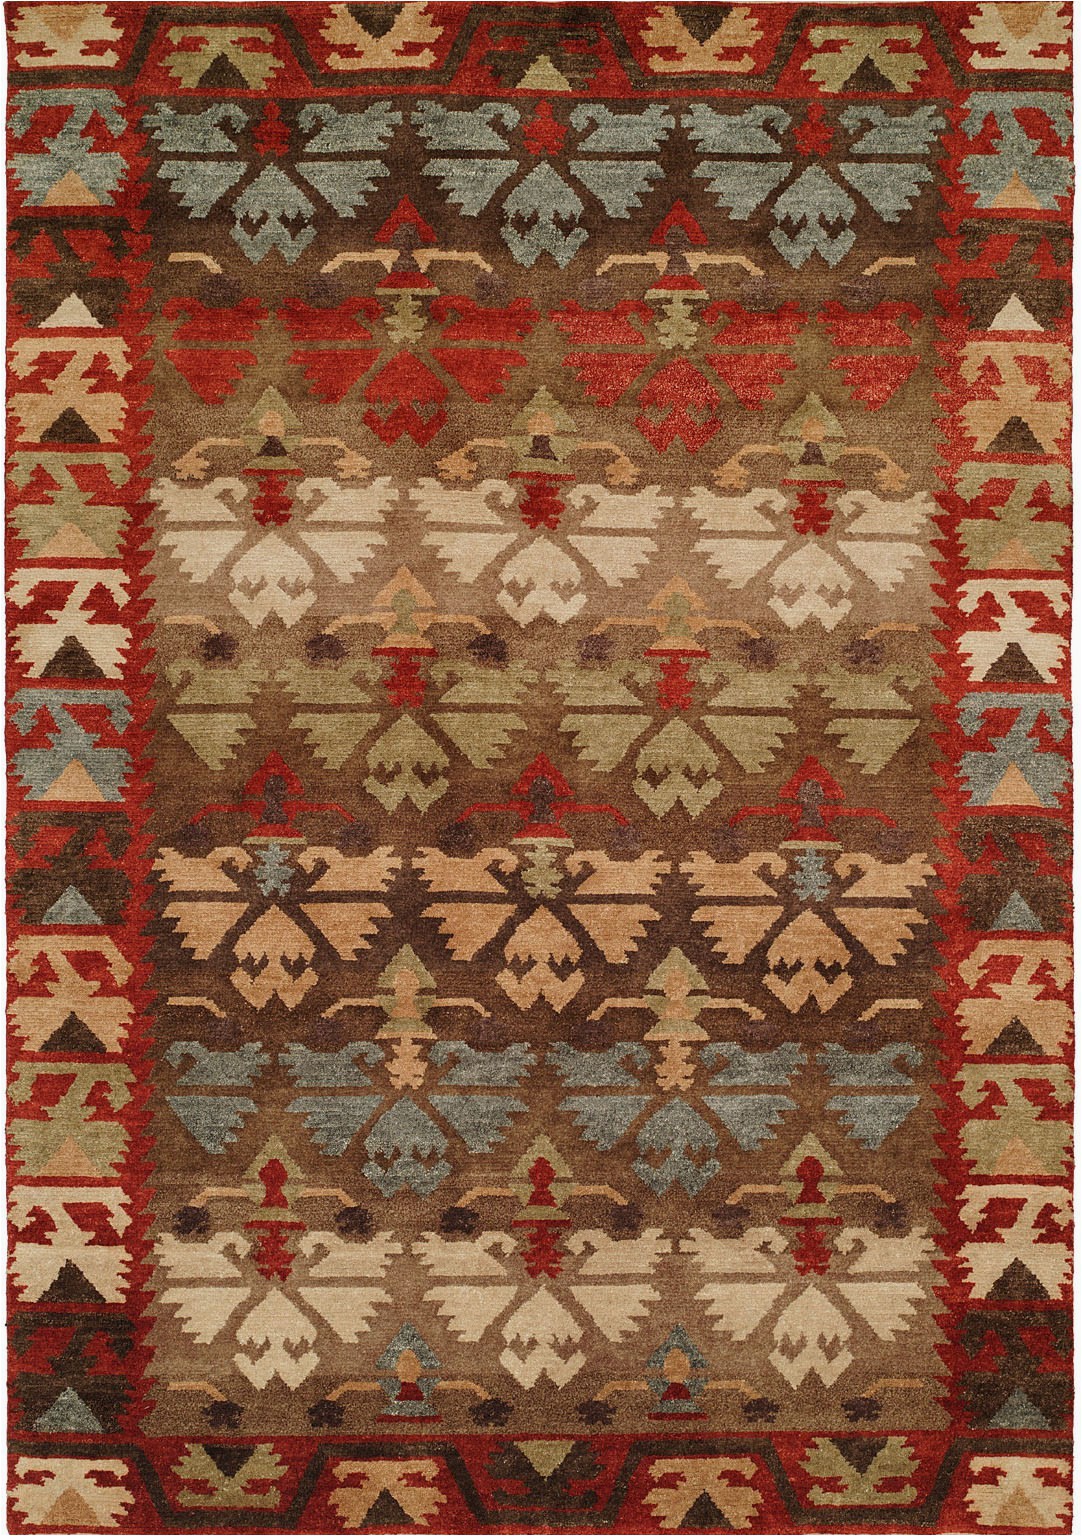 Brown and Rust Colored area Rugs Nomadic Caucasian Design Rust Brown Light Green and Blue